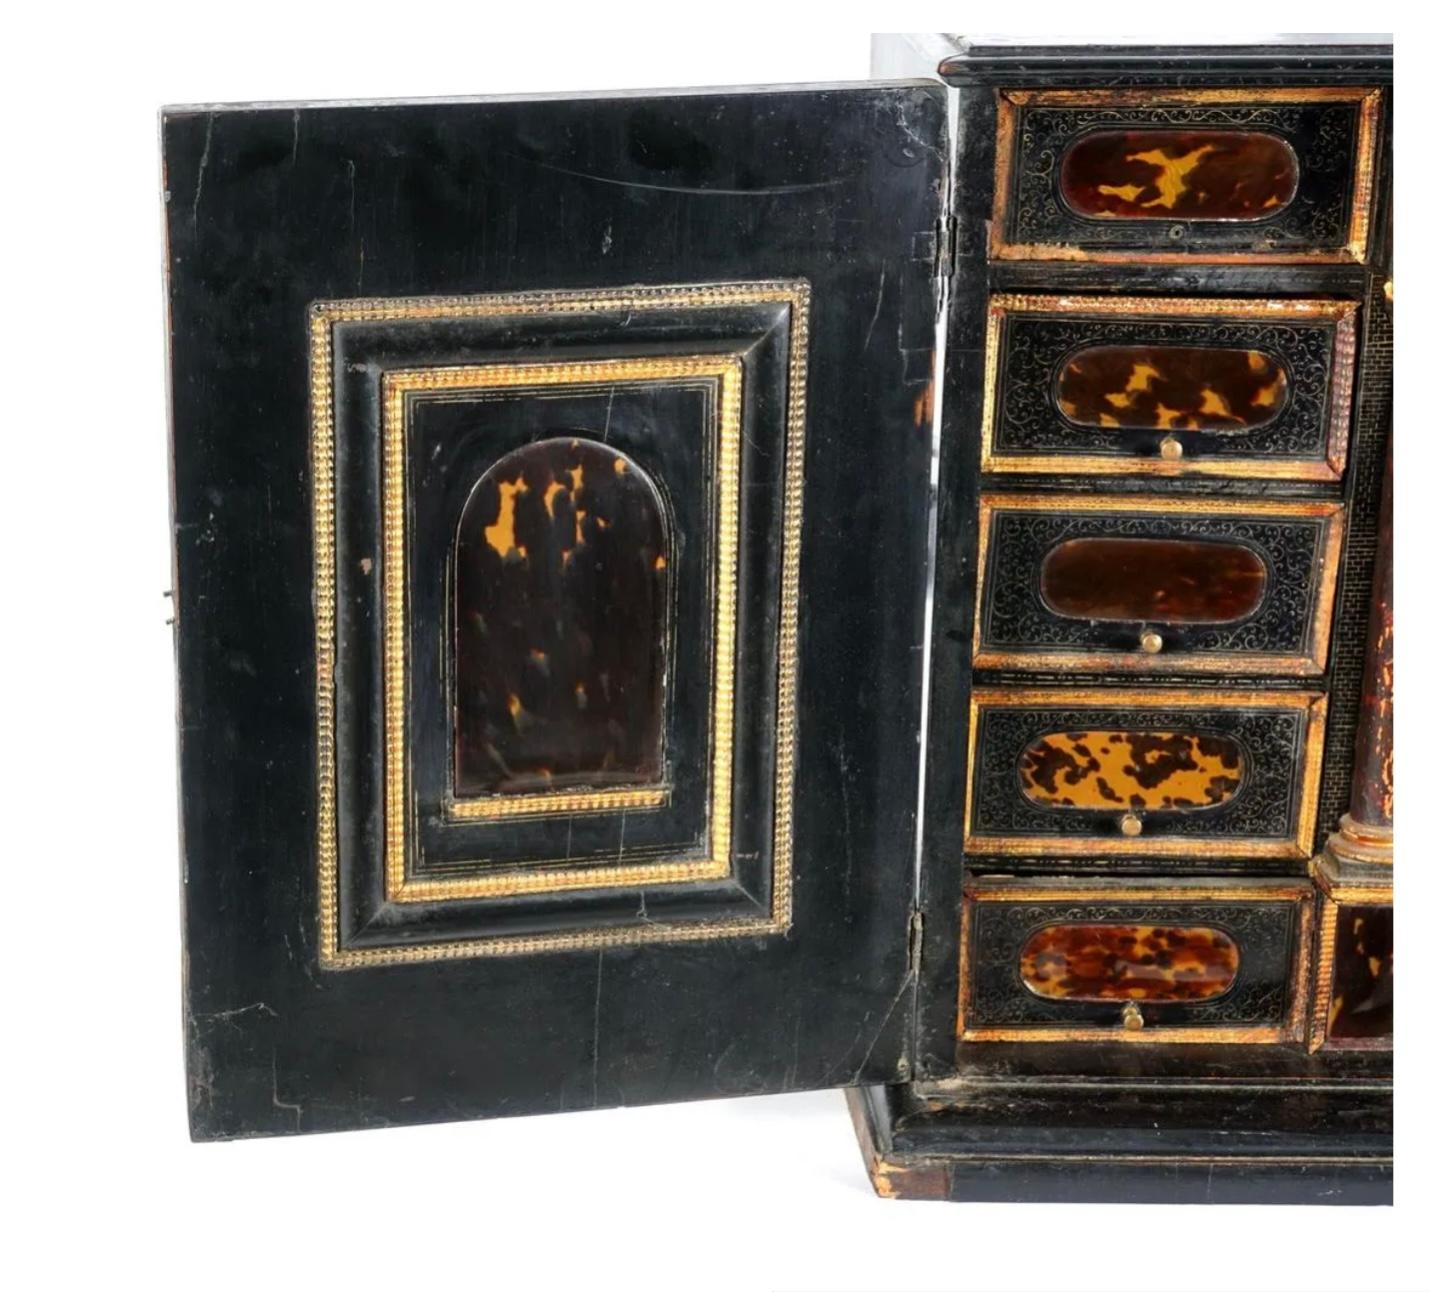 17th century Ebonized case with parcel gilt decoration, iron handles and hinges. Fitted interior with inset tortoiseshell panels surrounded by brass filigree inlaid ebonized wood drawer and door fronts. Faux painted architectural columns on either